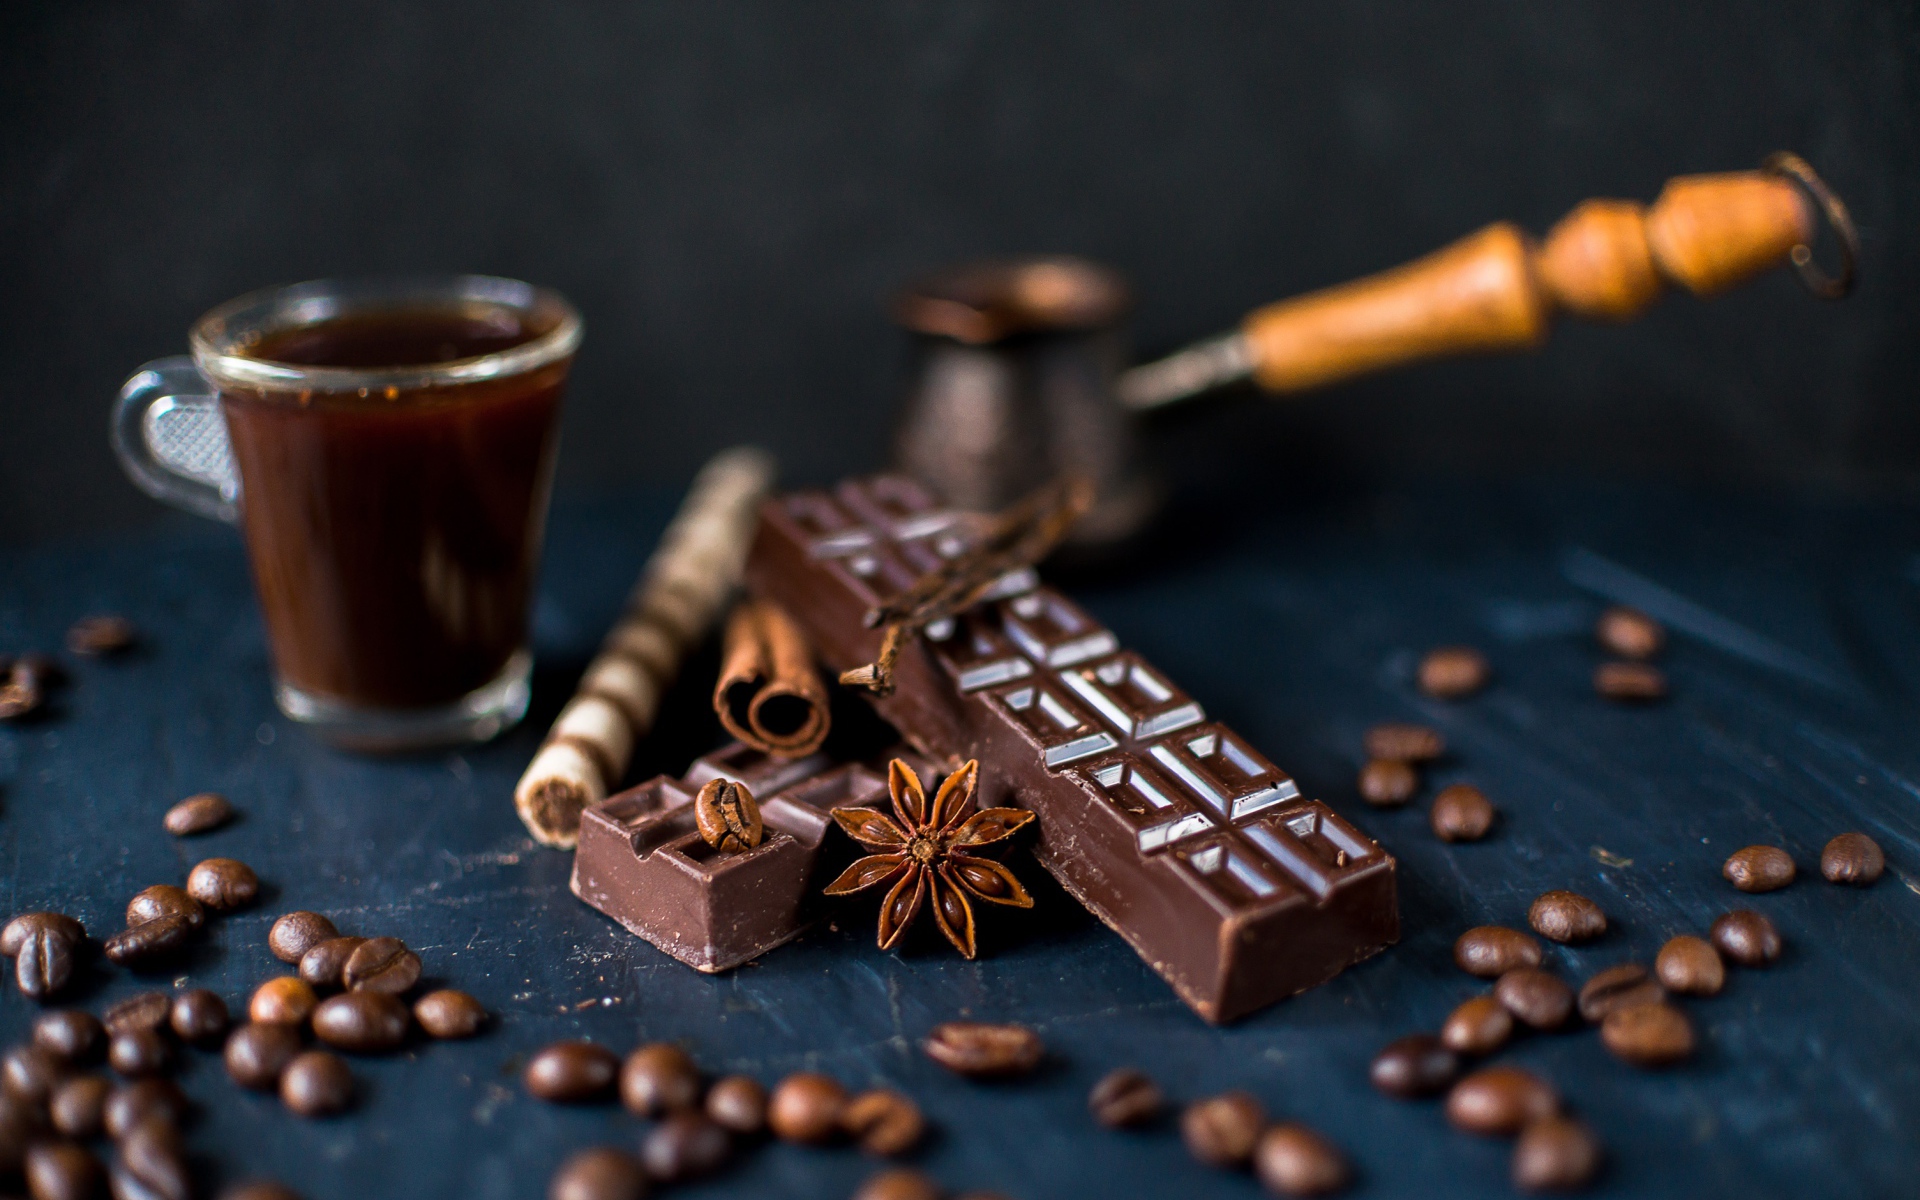 A cup of coffee on a table with chocolate and coffee beans